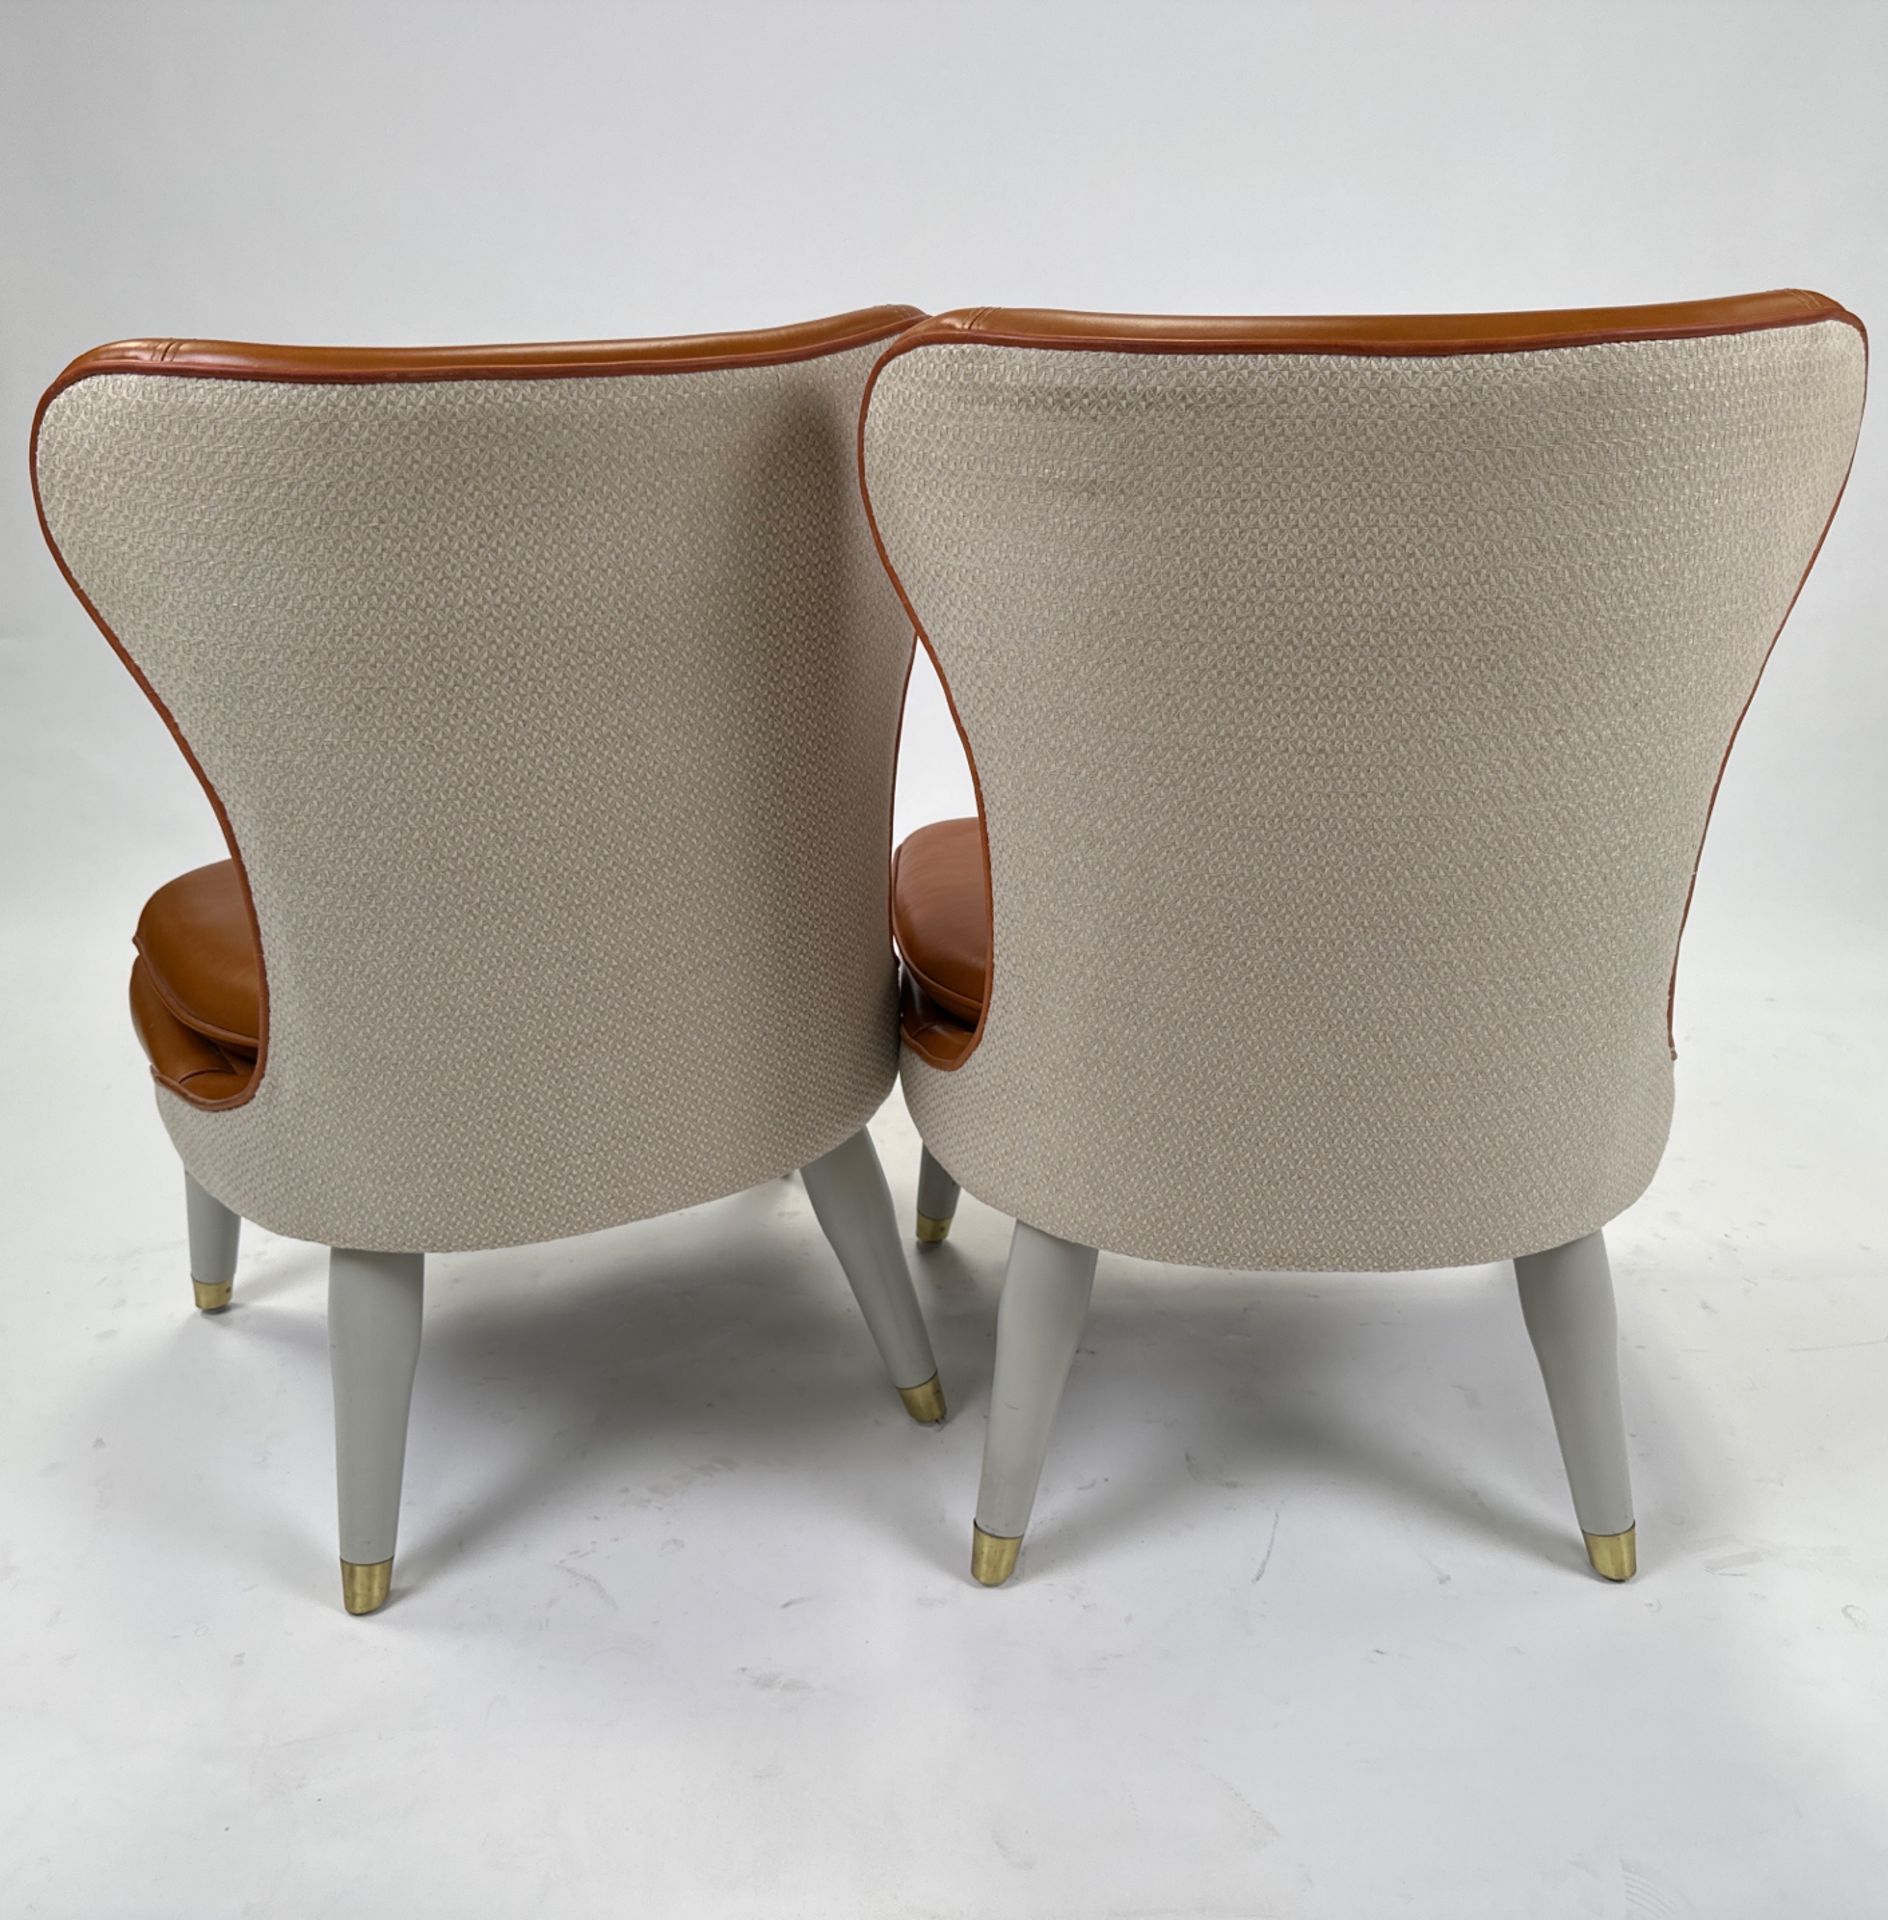 Pair of Ben Whistler Chairs Commissioned by Robert Angell Designed for The Berkeley - Image 3 of 5